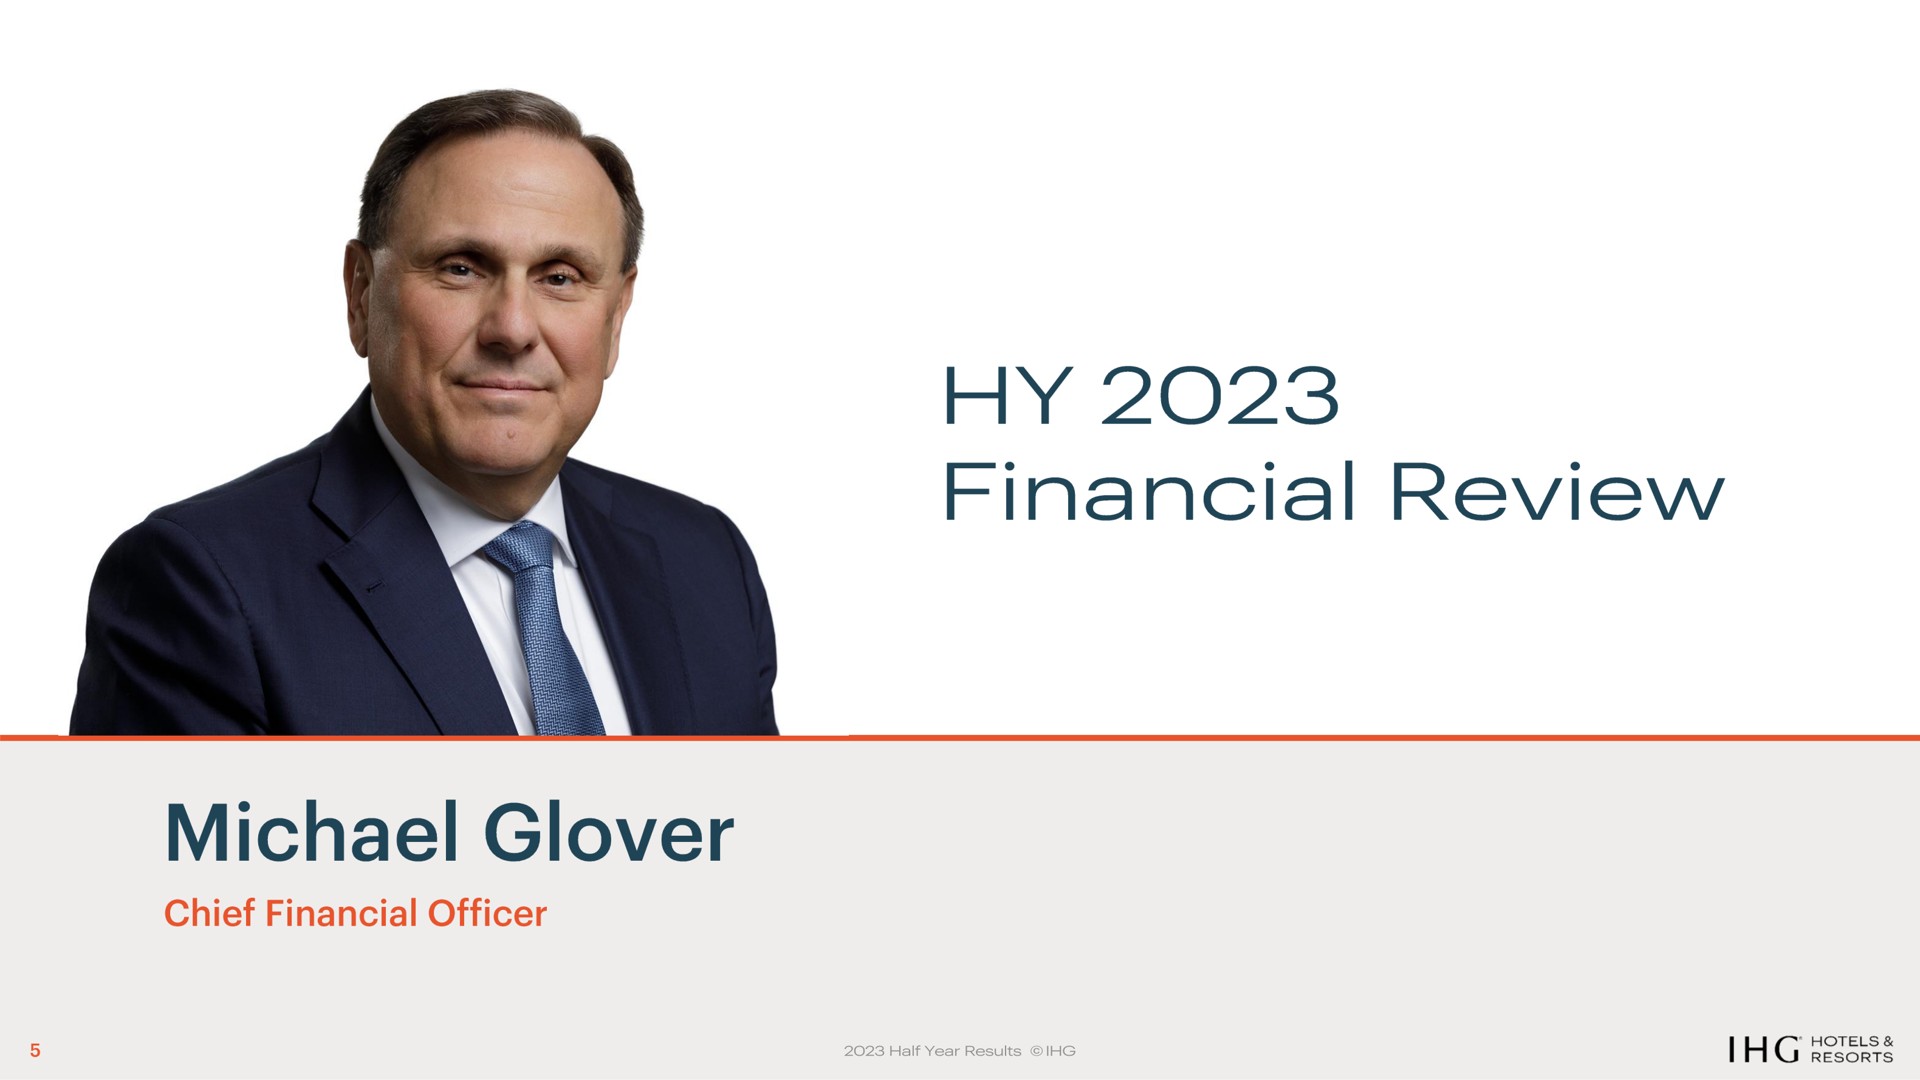 financial review glover | IHG Hotels